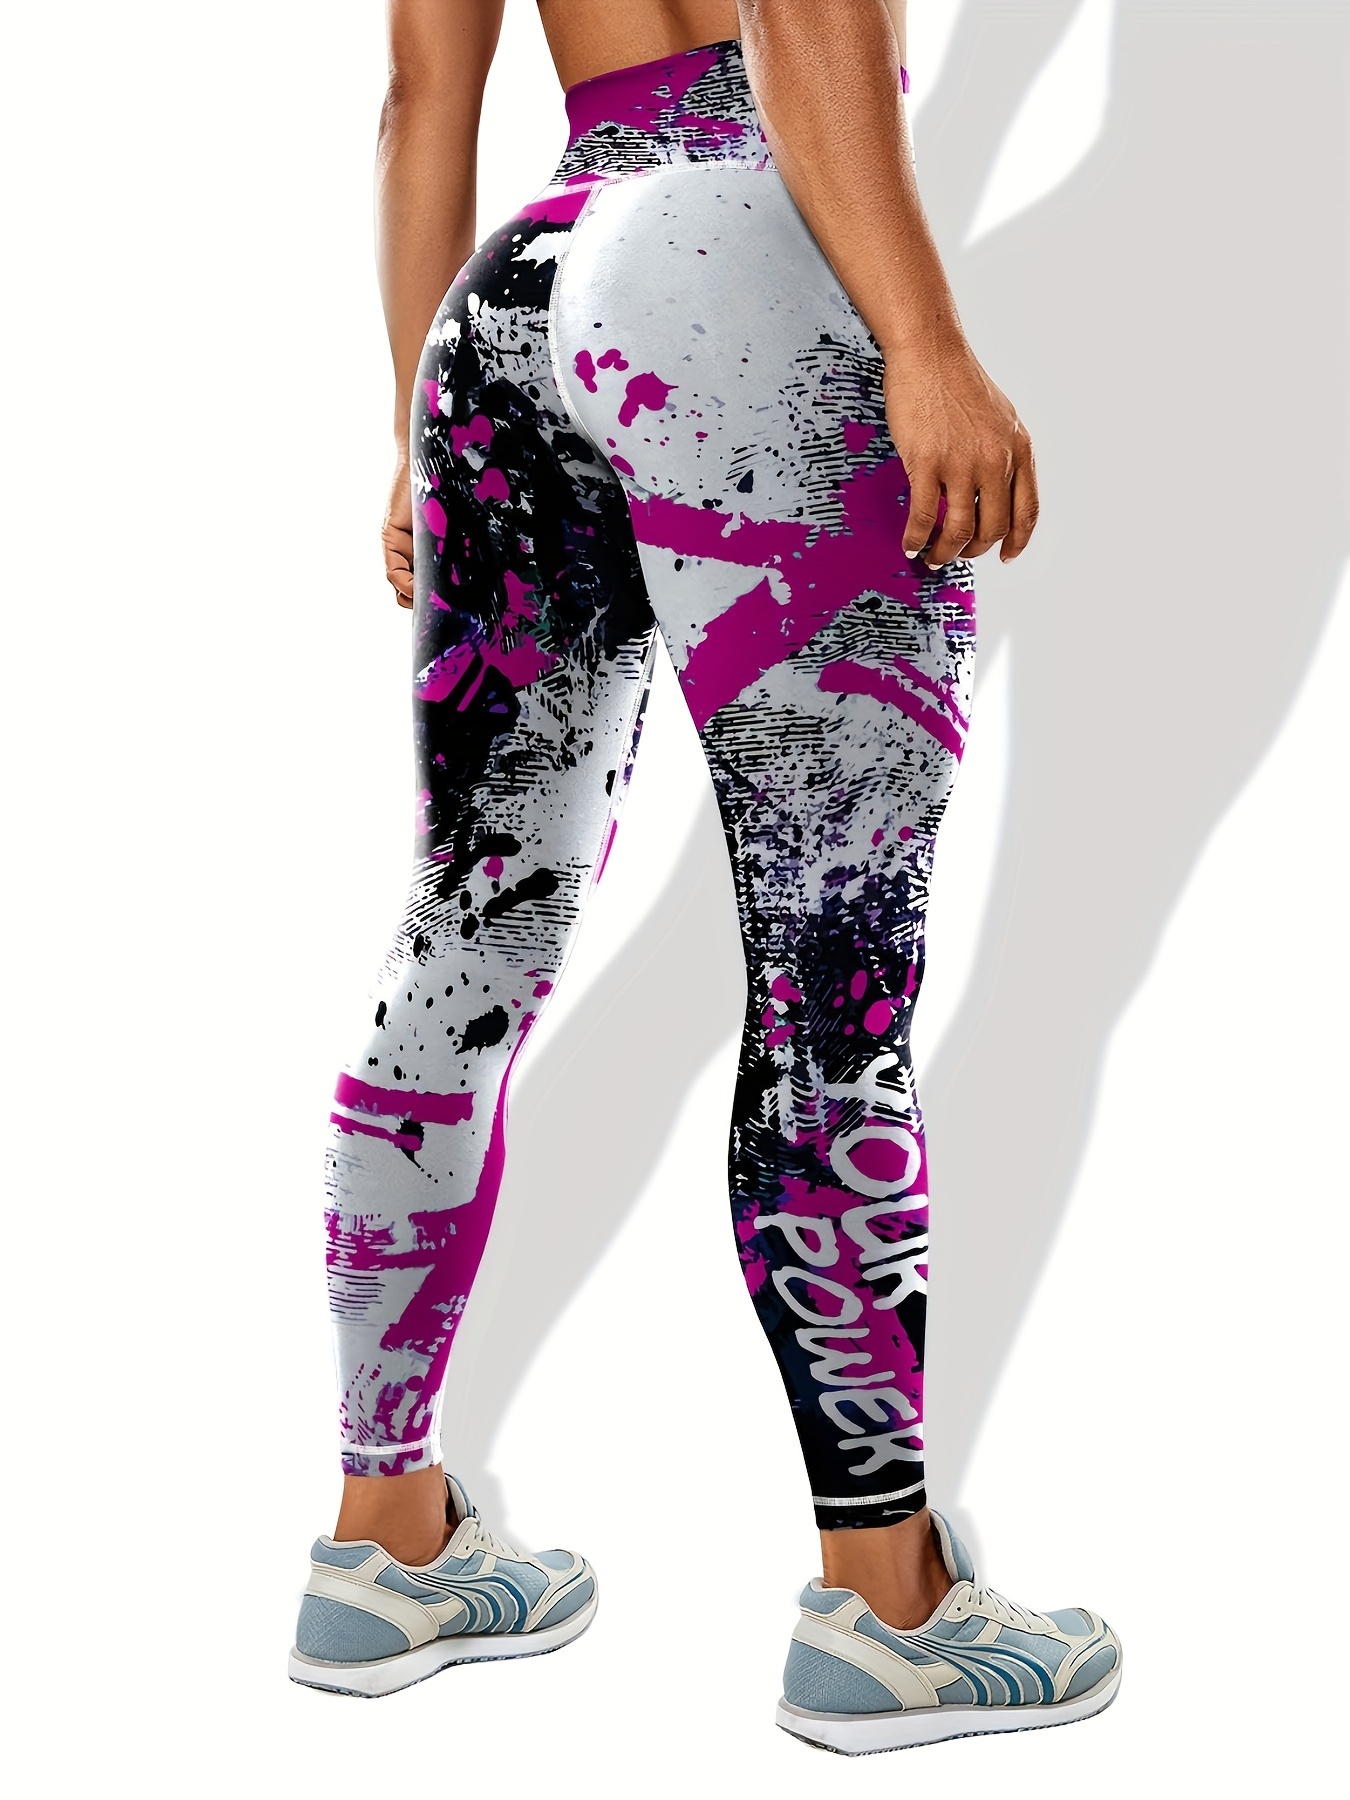 these workout clothes are so comfortable and cute!! check out QQQ